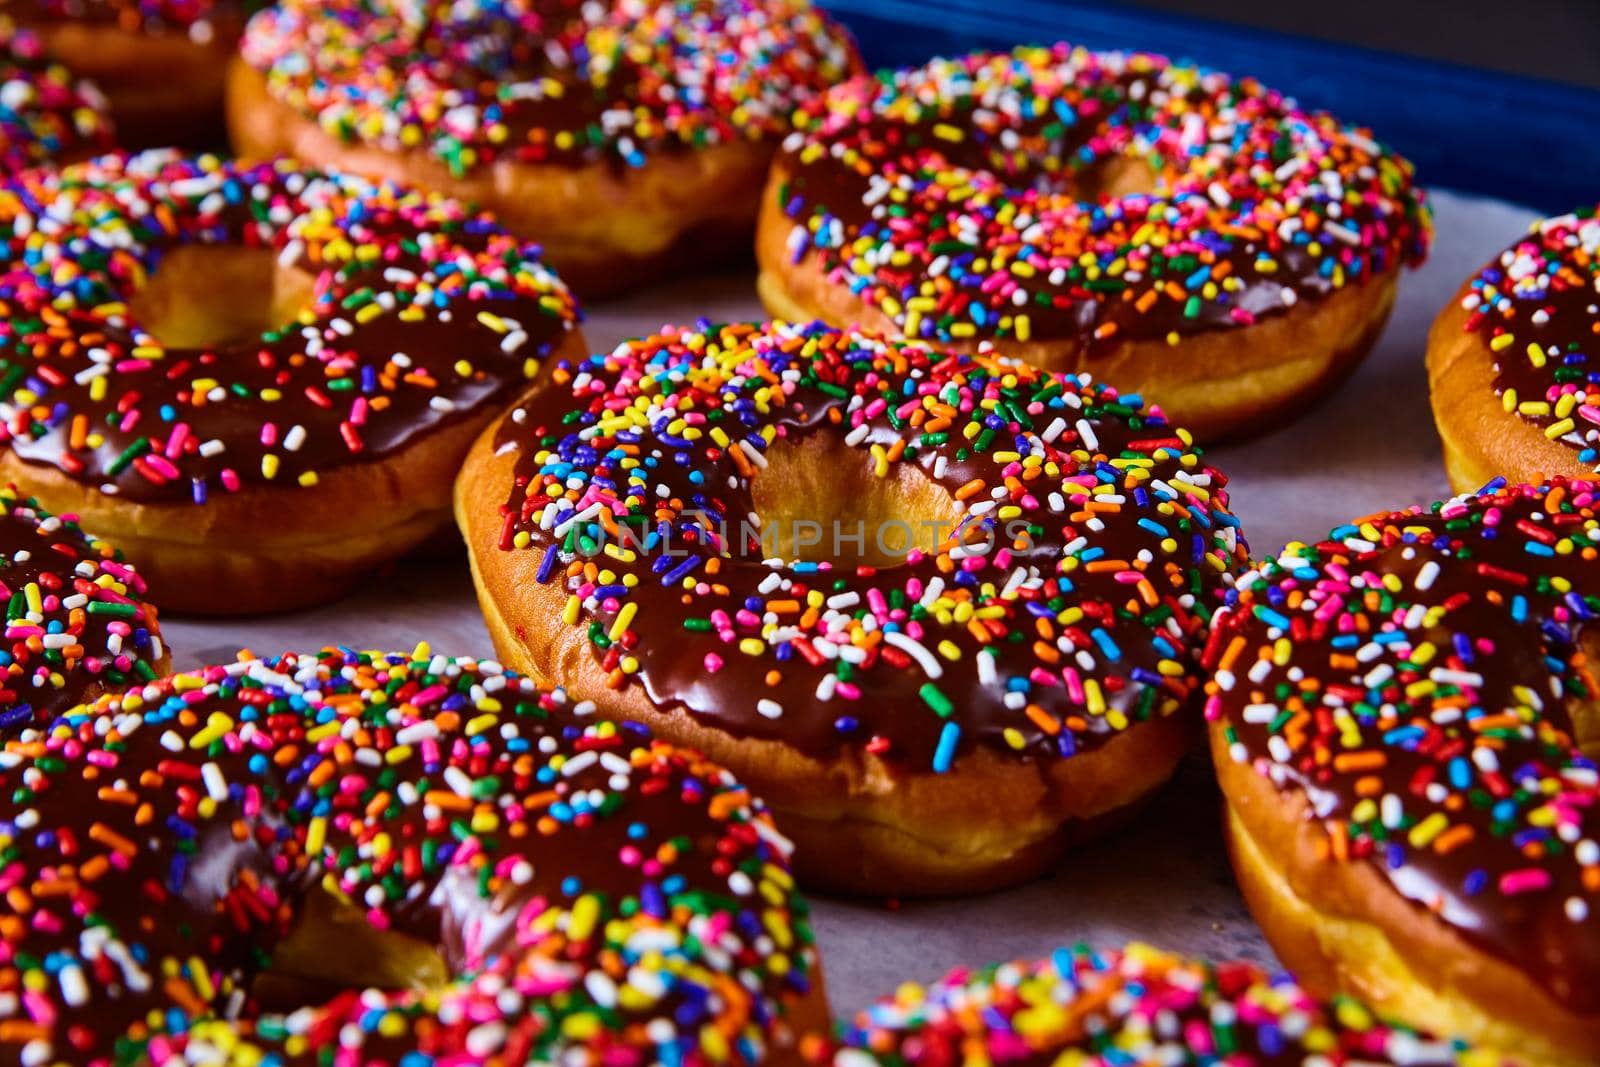 Tray full of fresh baked yeast donuts with chocolate and colorful sprinkles by njproductions